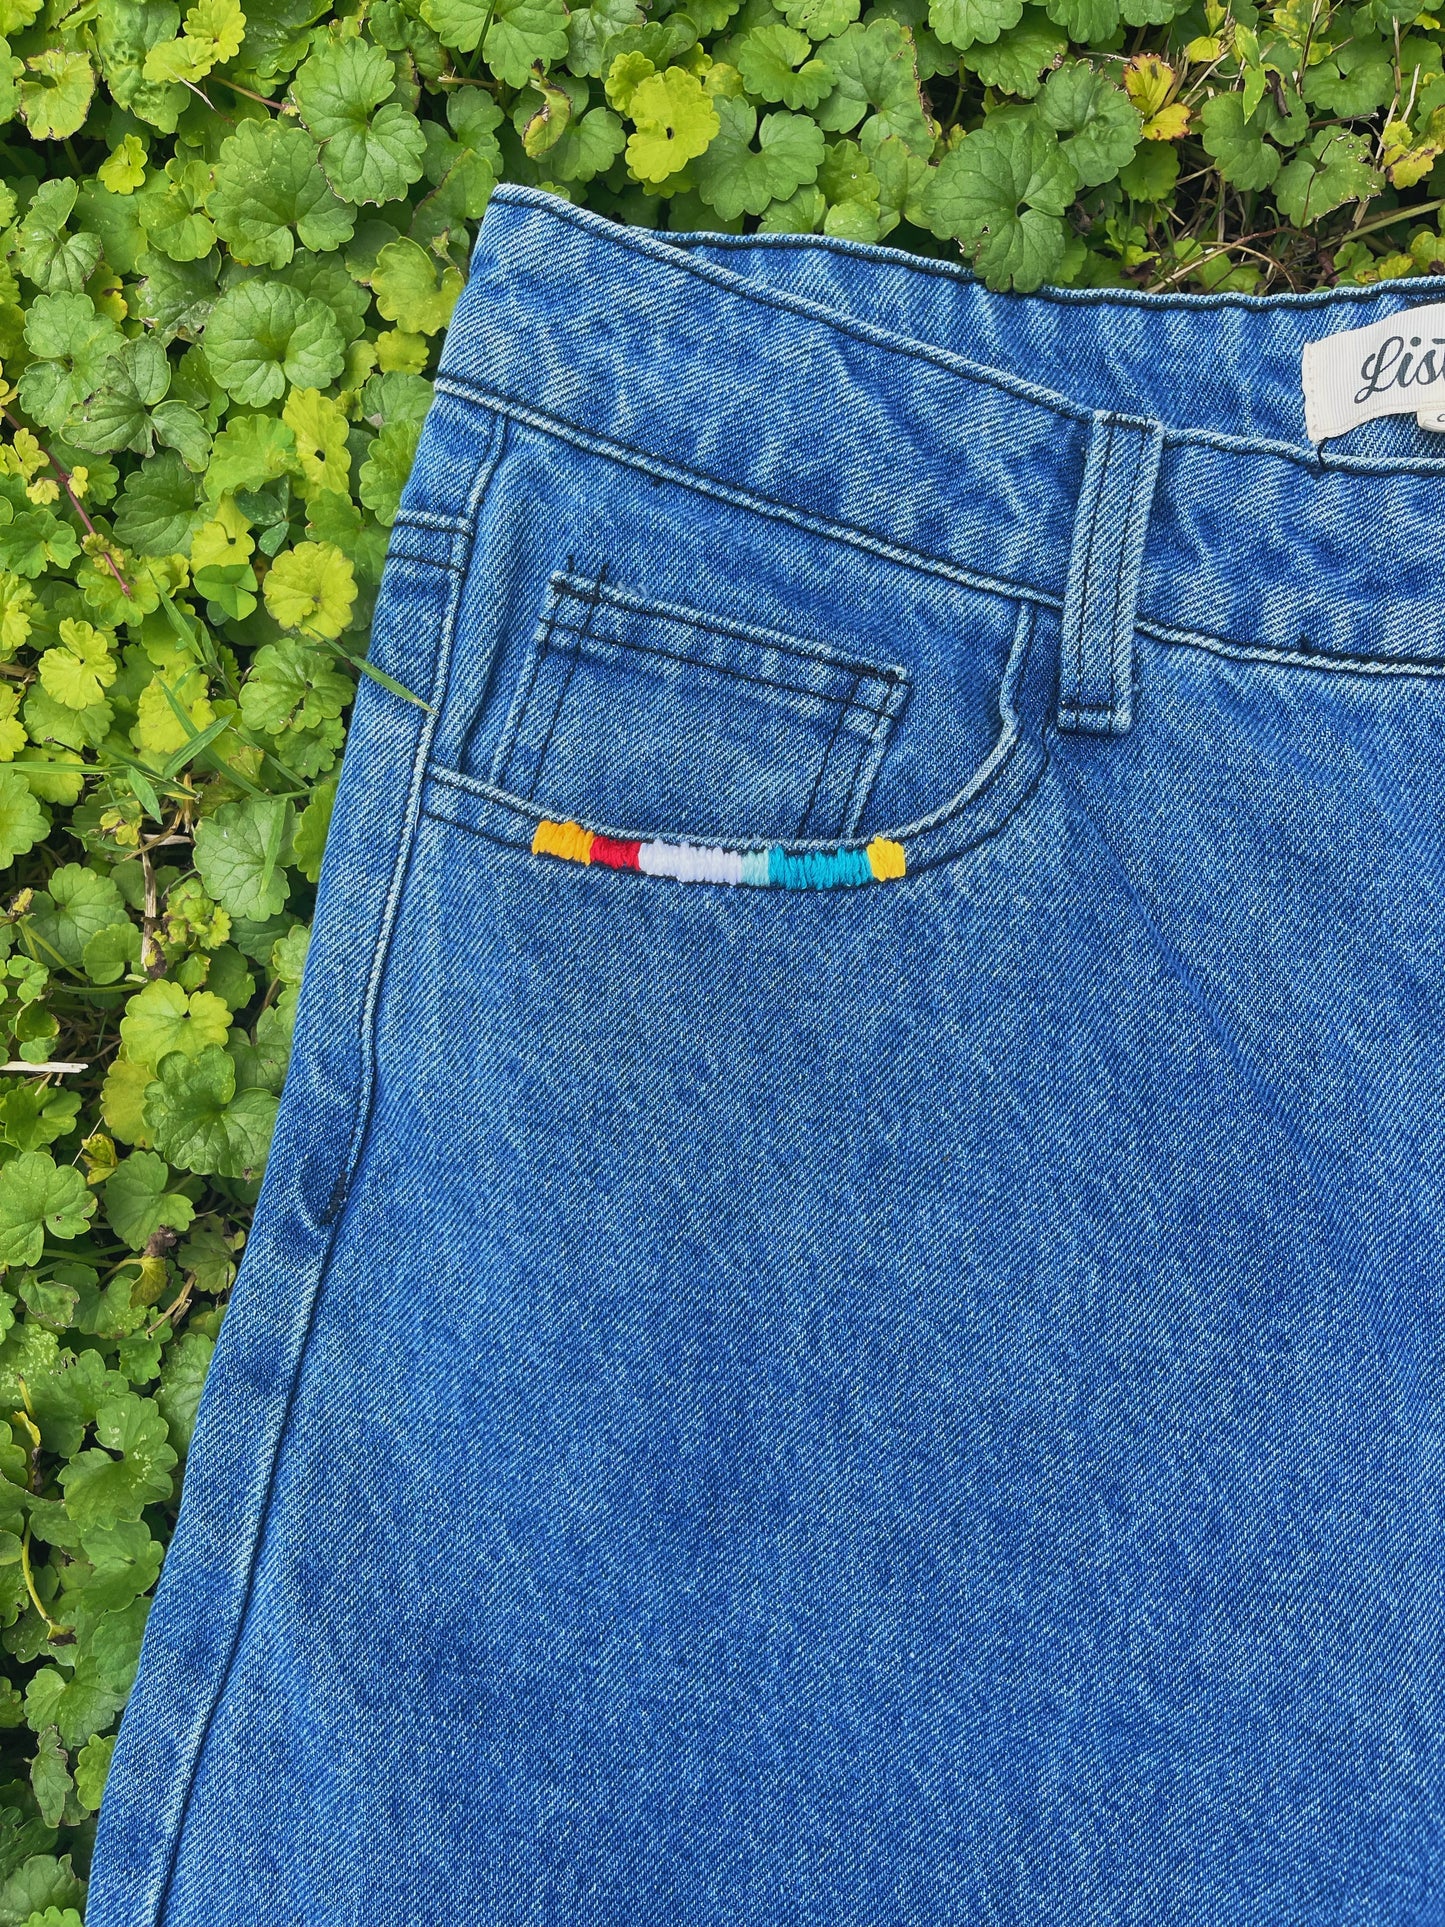 SEND IN YOUR DENIM | Surprise EMBROIDERED Jeans